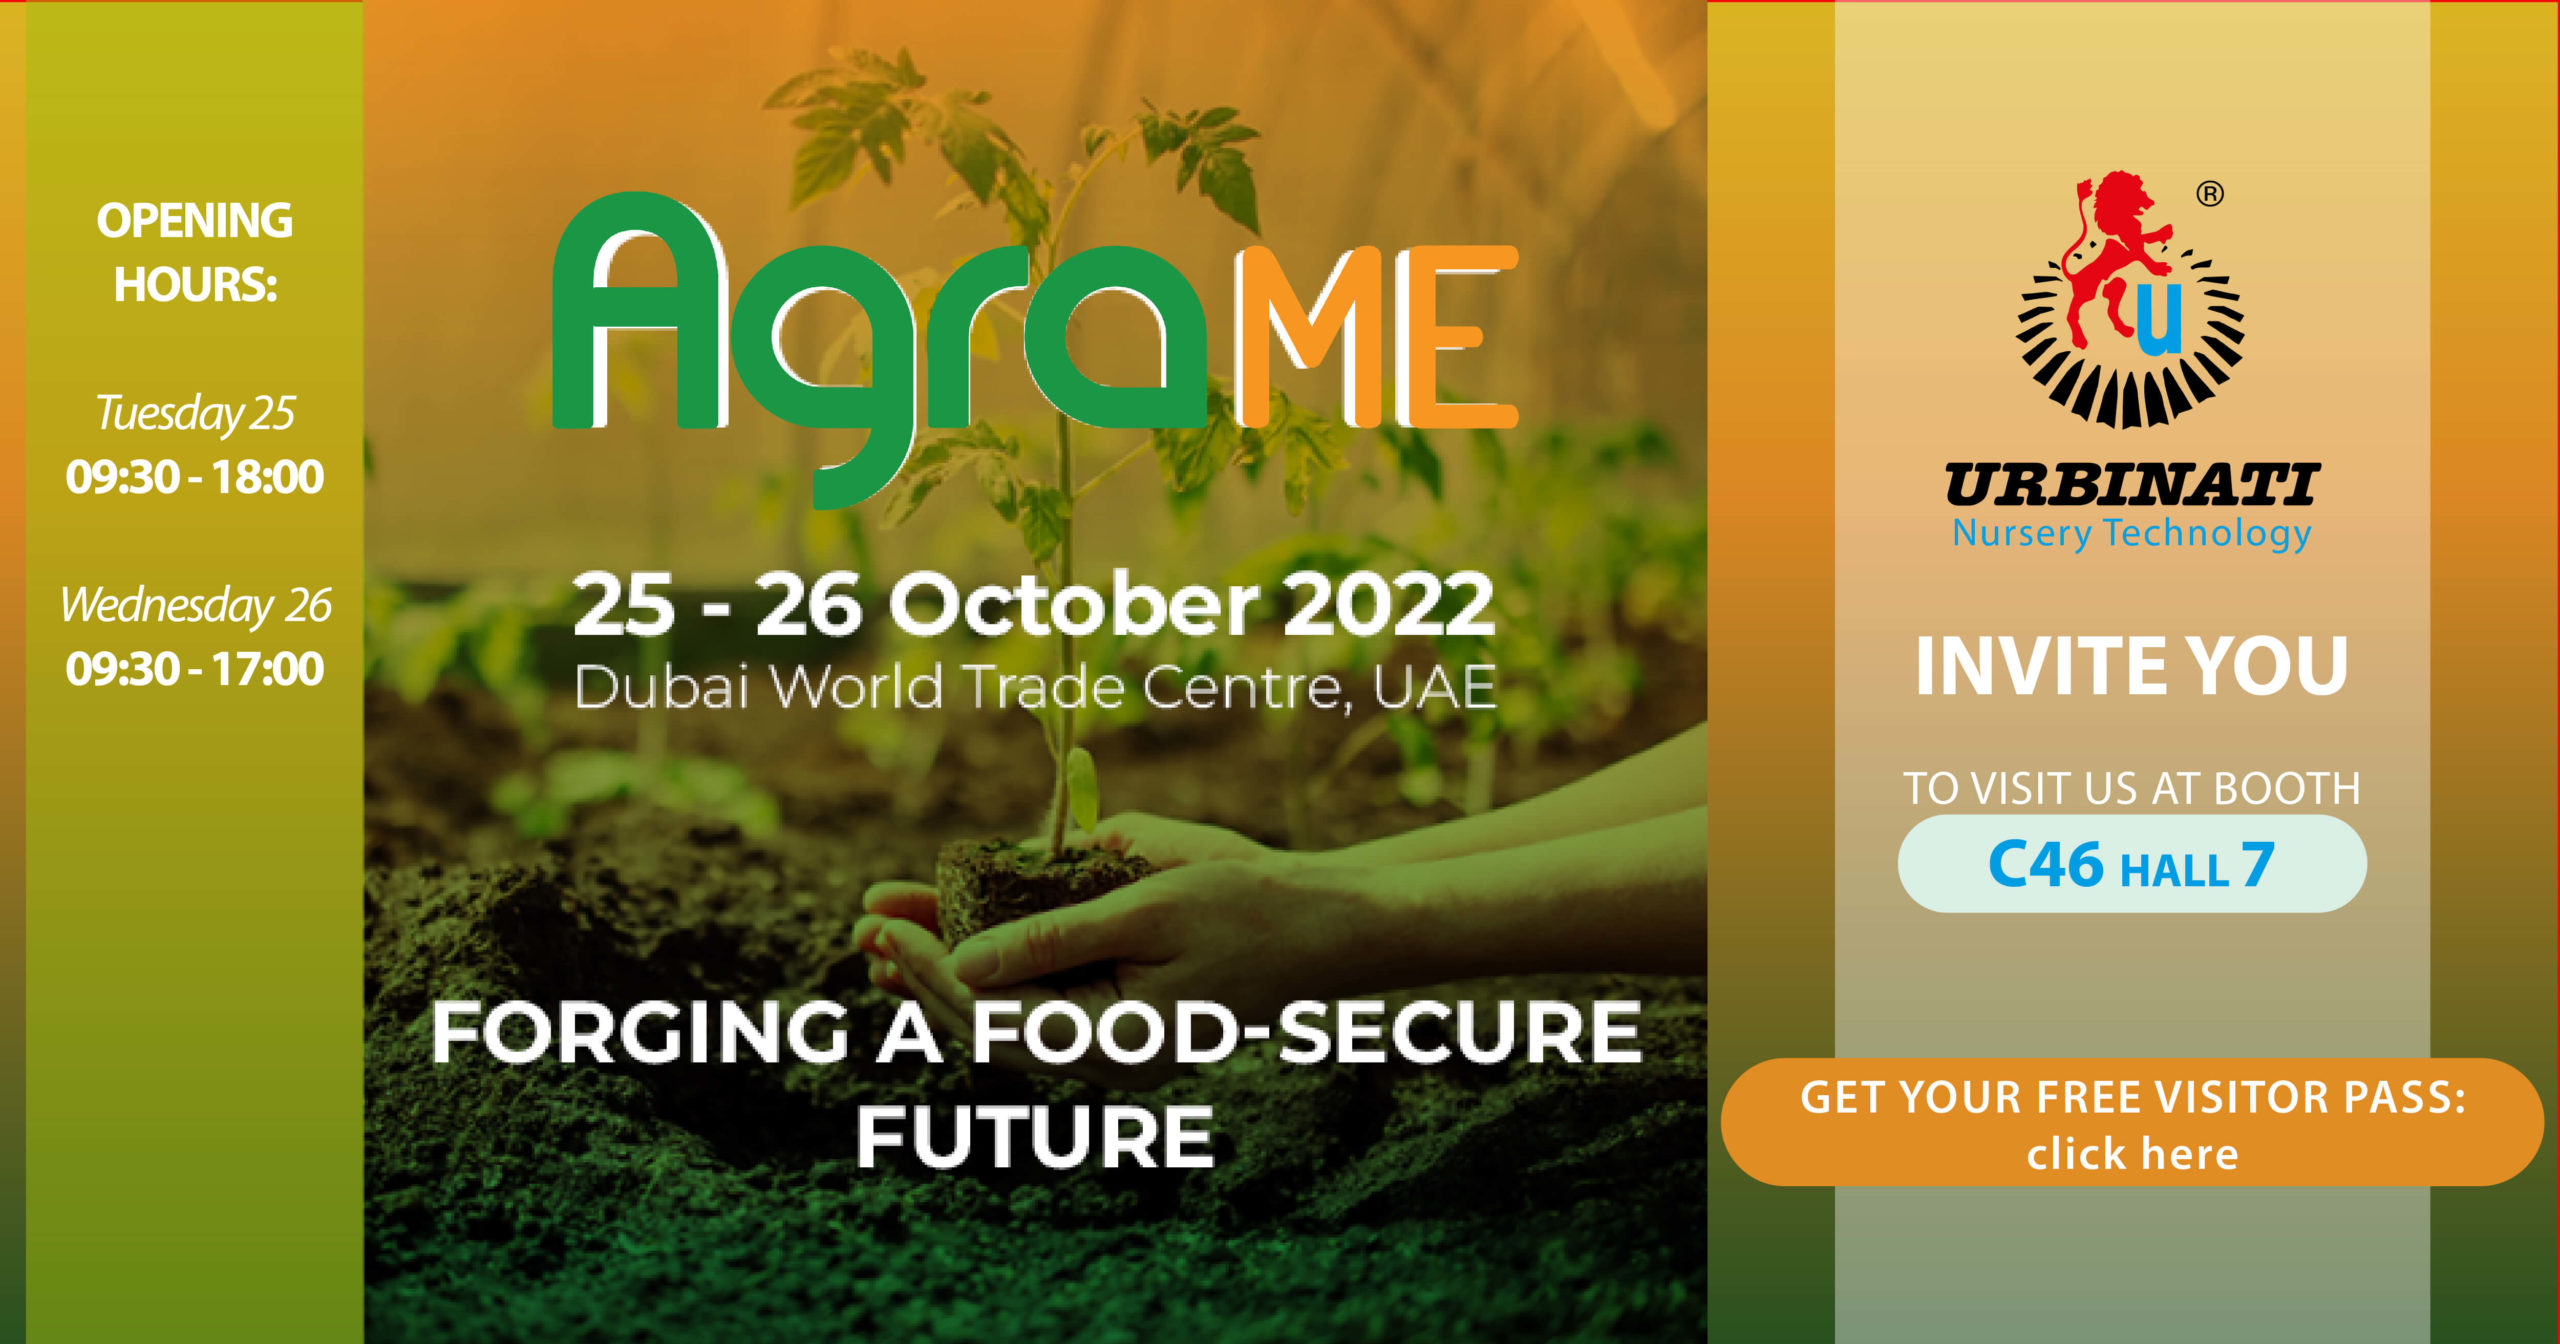 INVITATION TO AGRAME 25-26 OCTOBER 2022